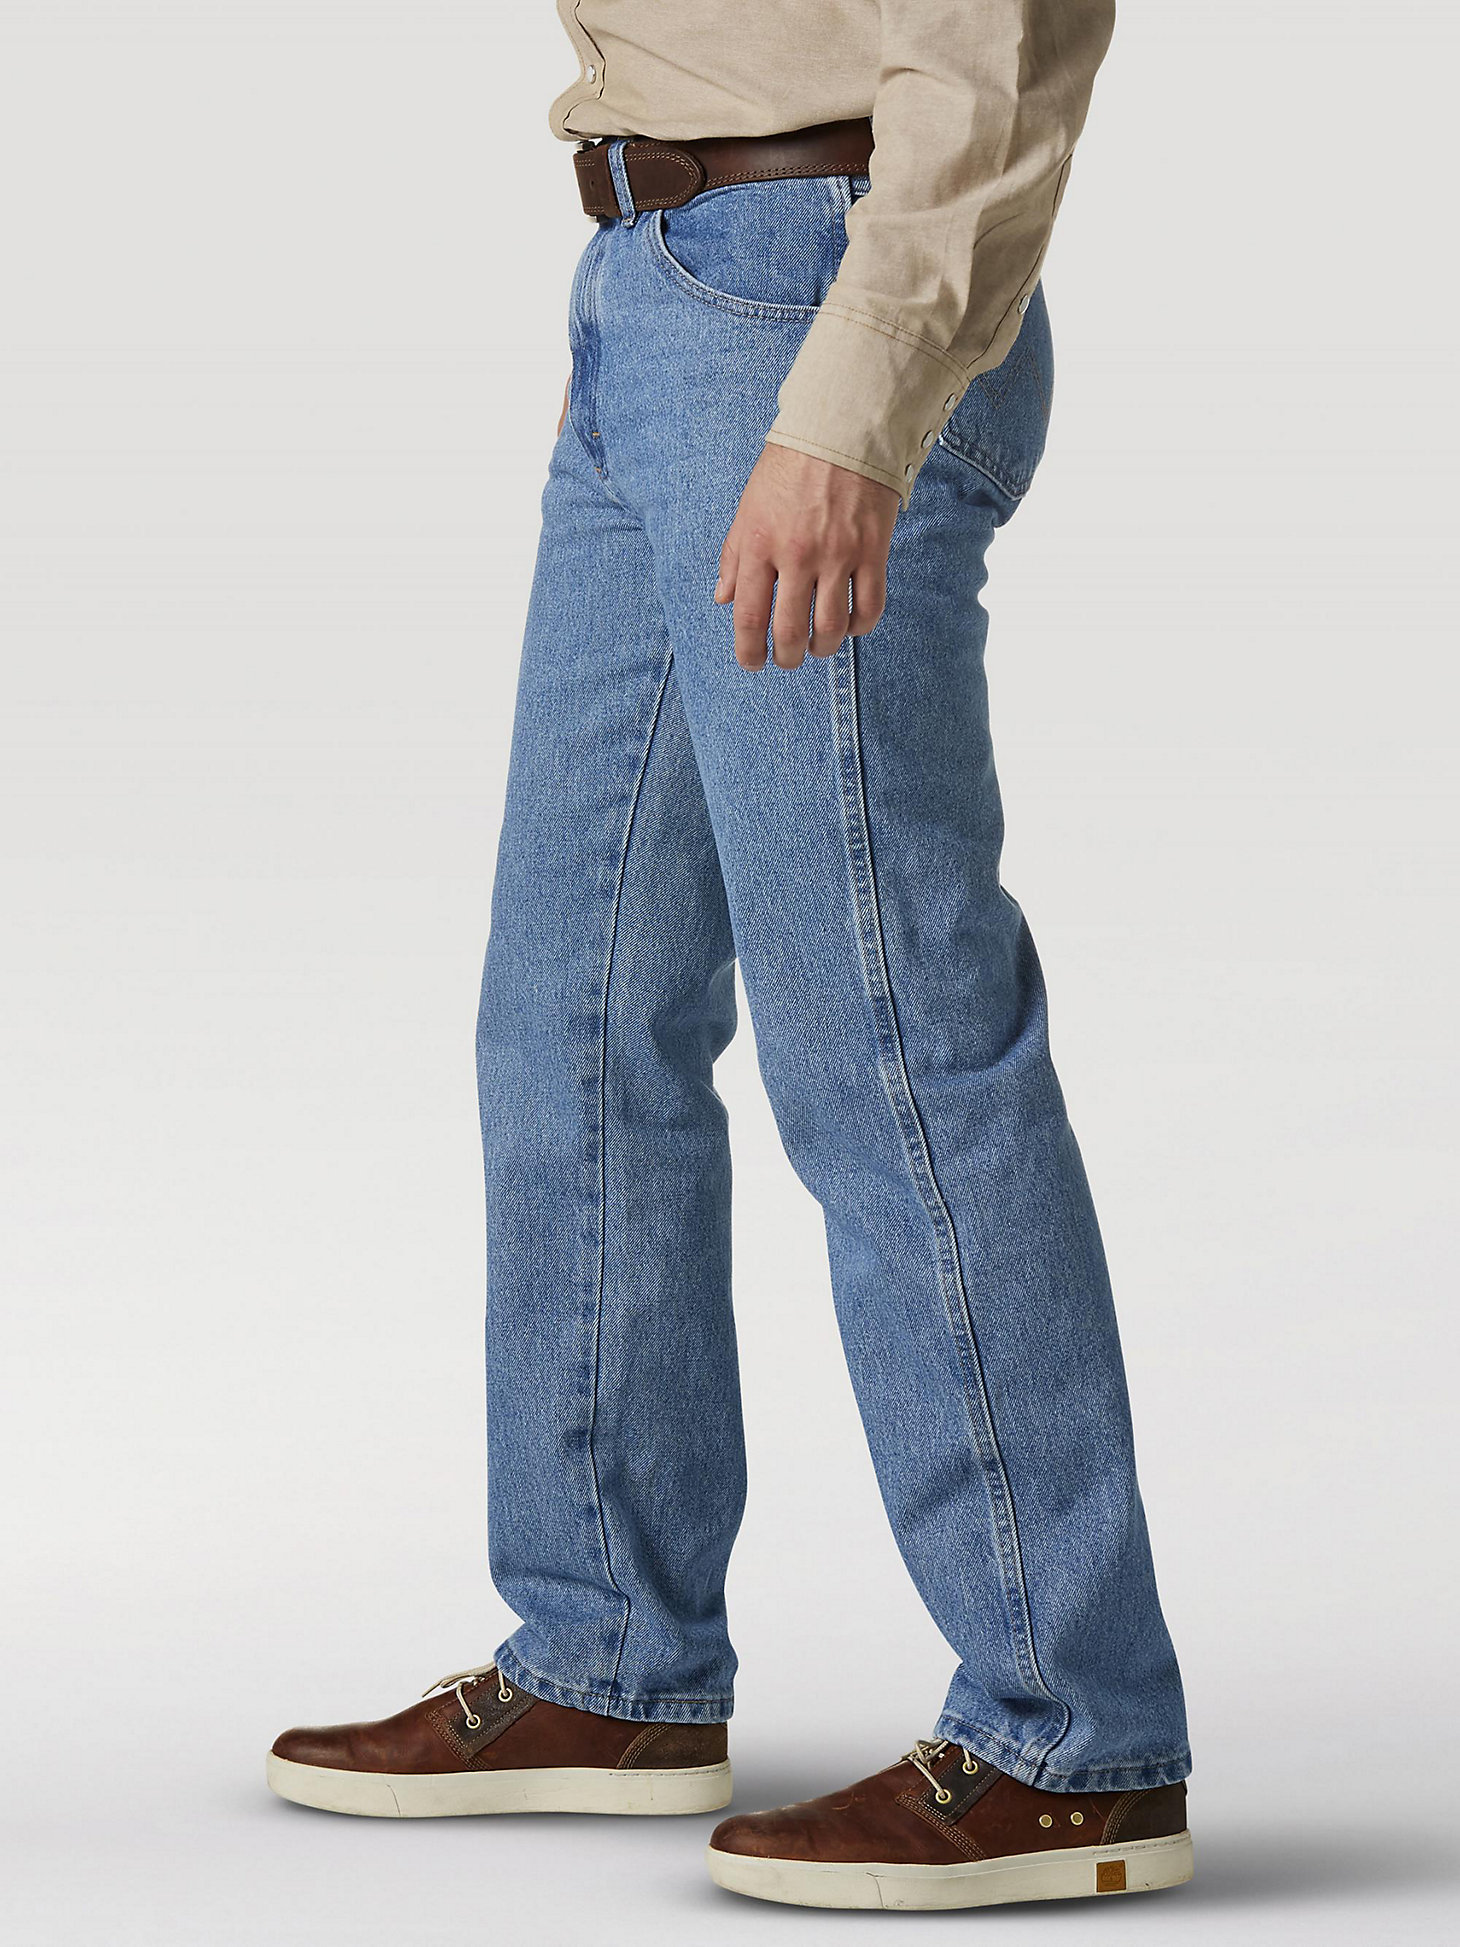 Wrangler Rugged Wear® Classic Fit Jean in Rough Wash alternative view 1